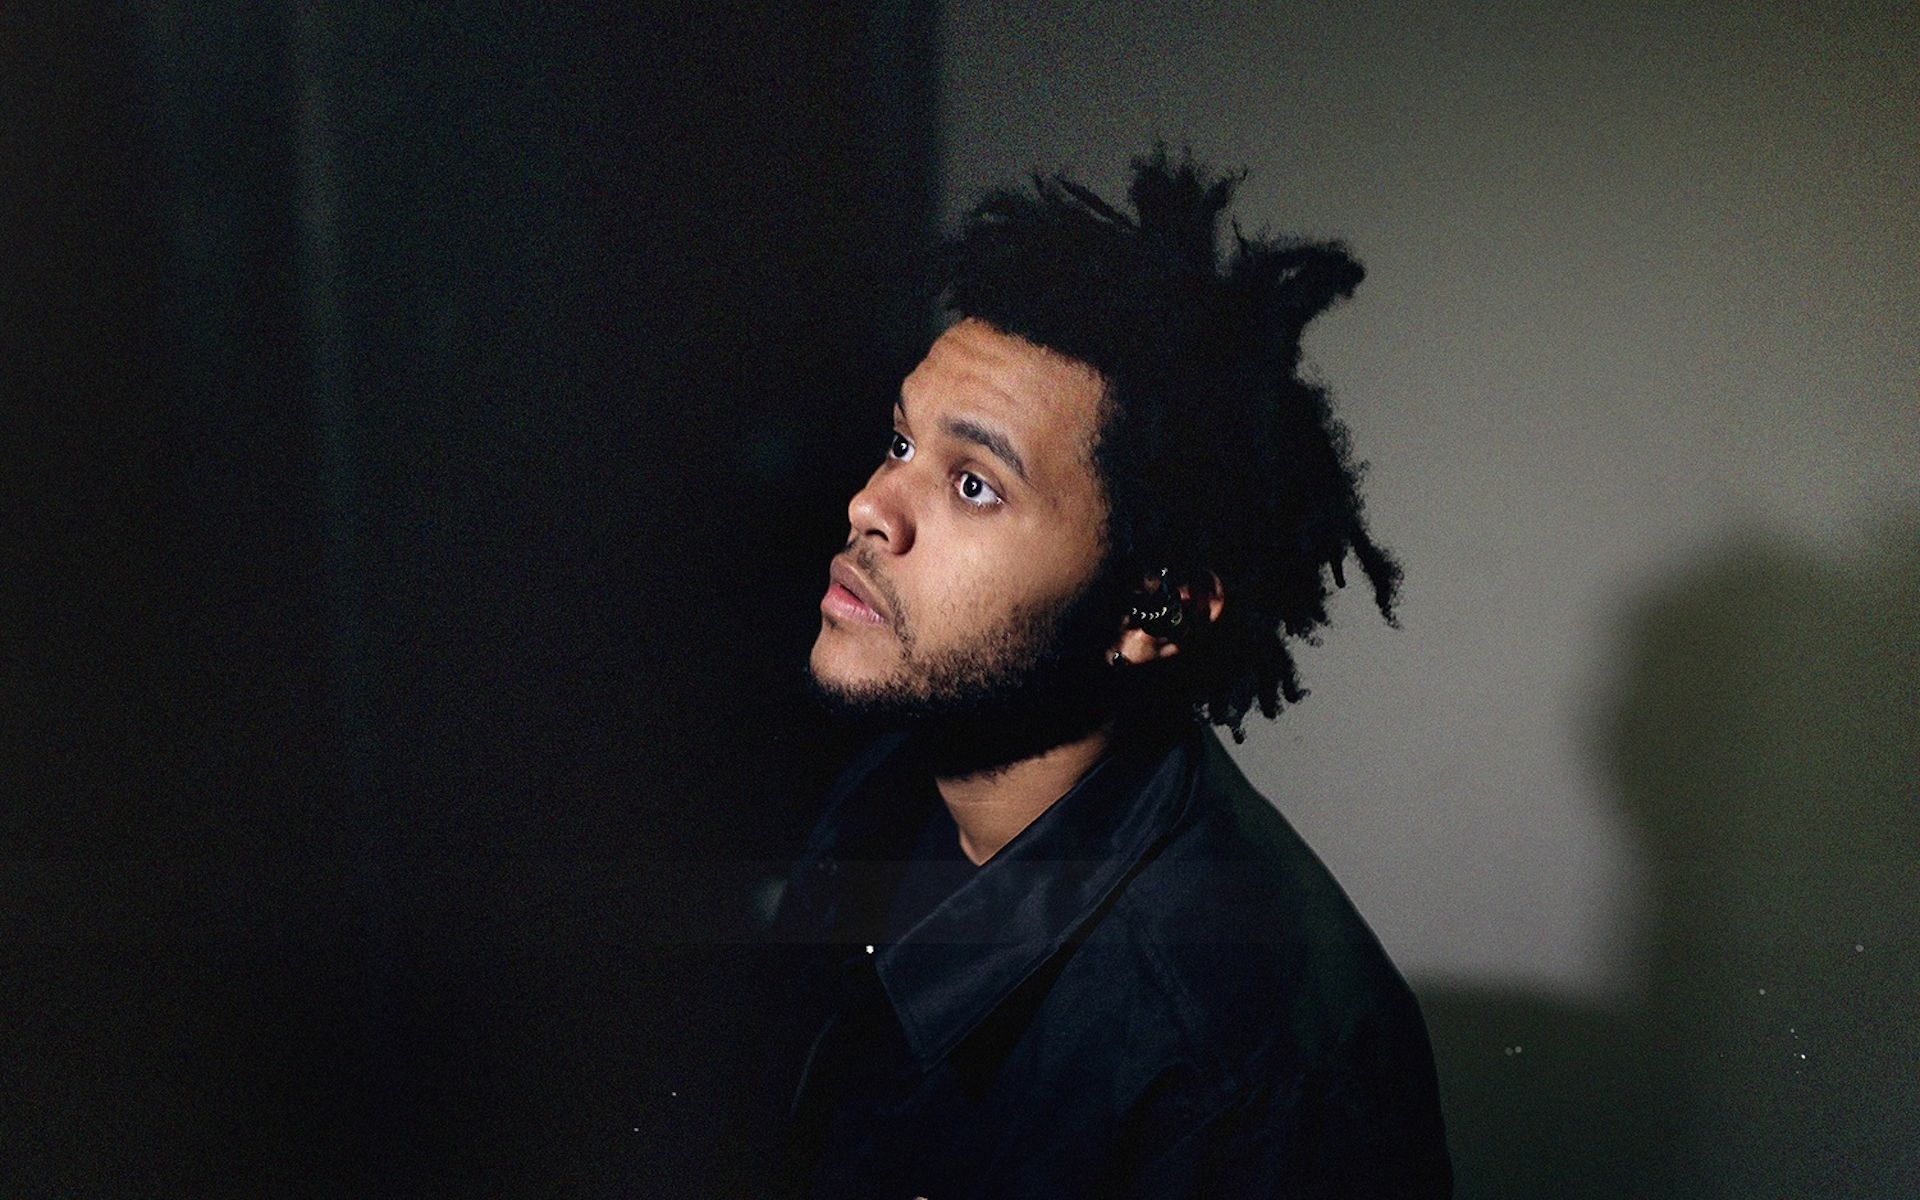 Thinking about the weekend. The Weeknd. Weekend. The Weeknd 2015.